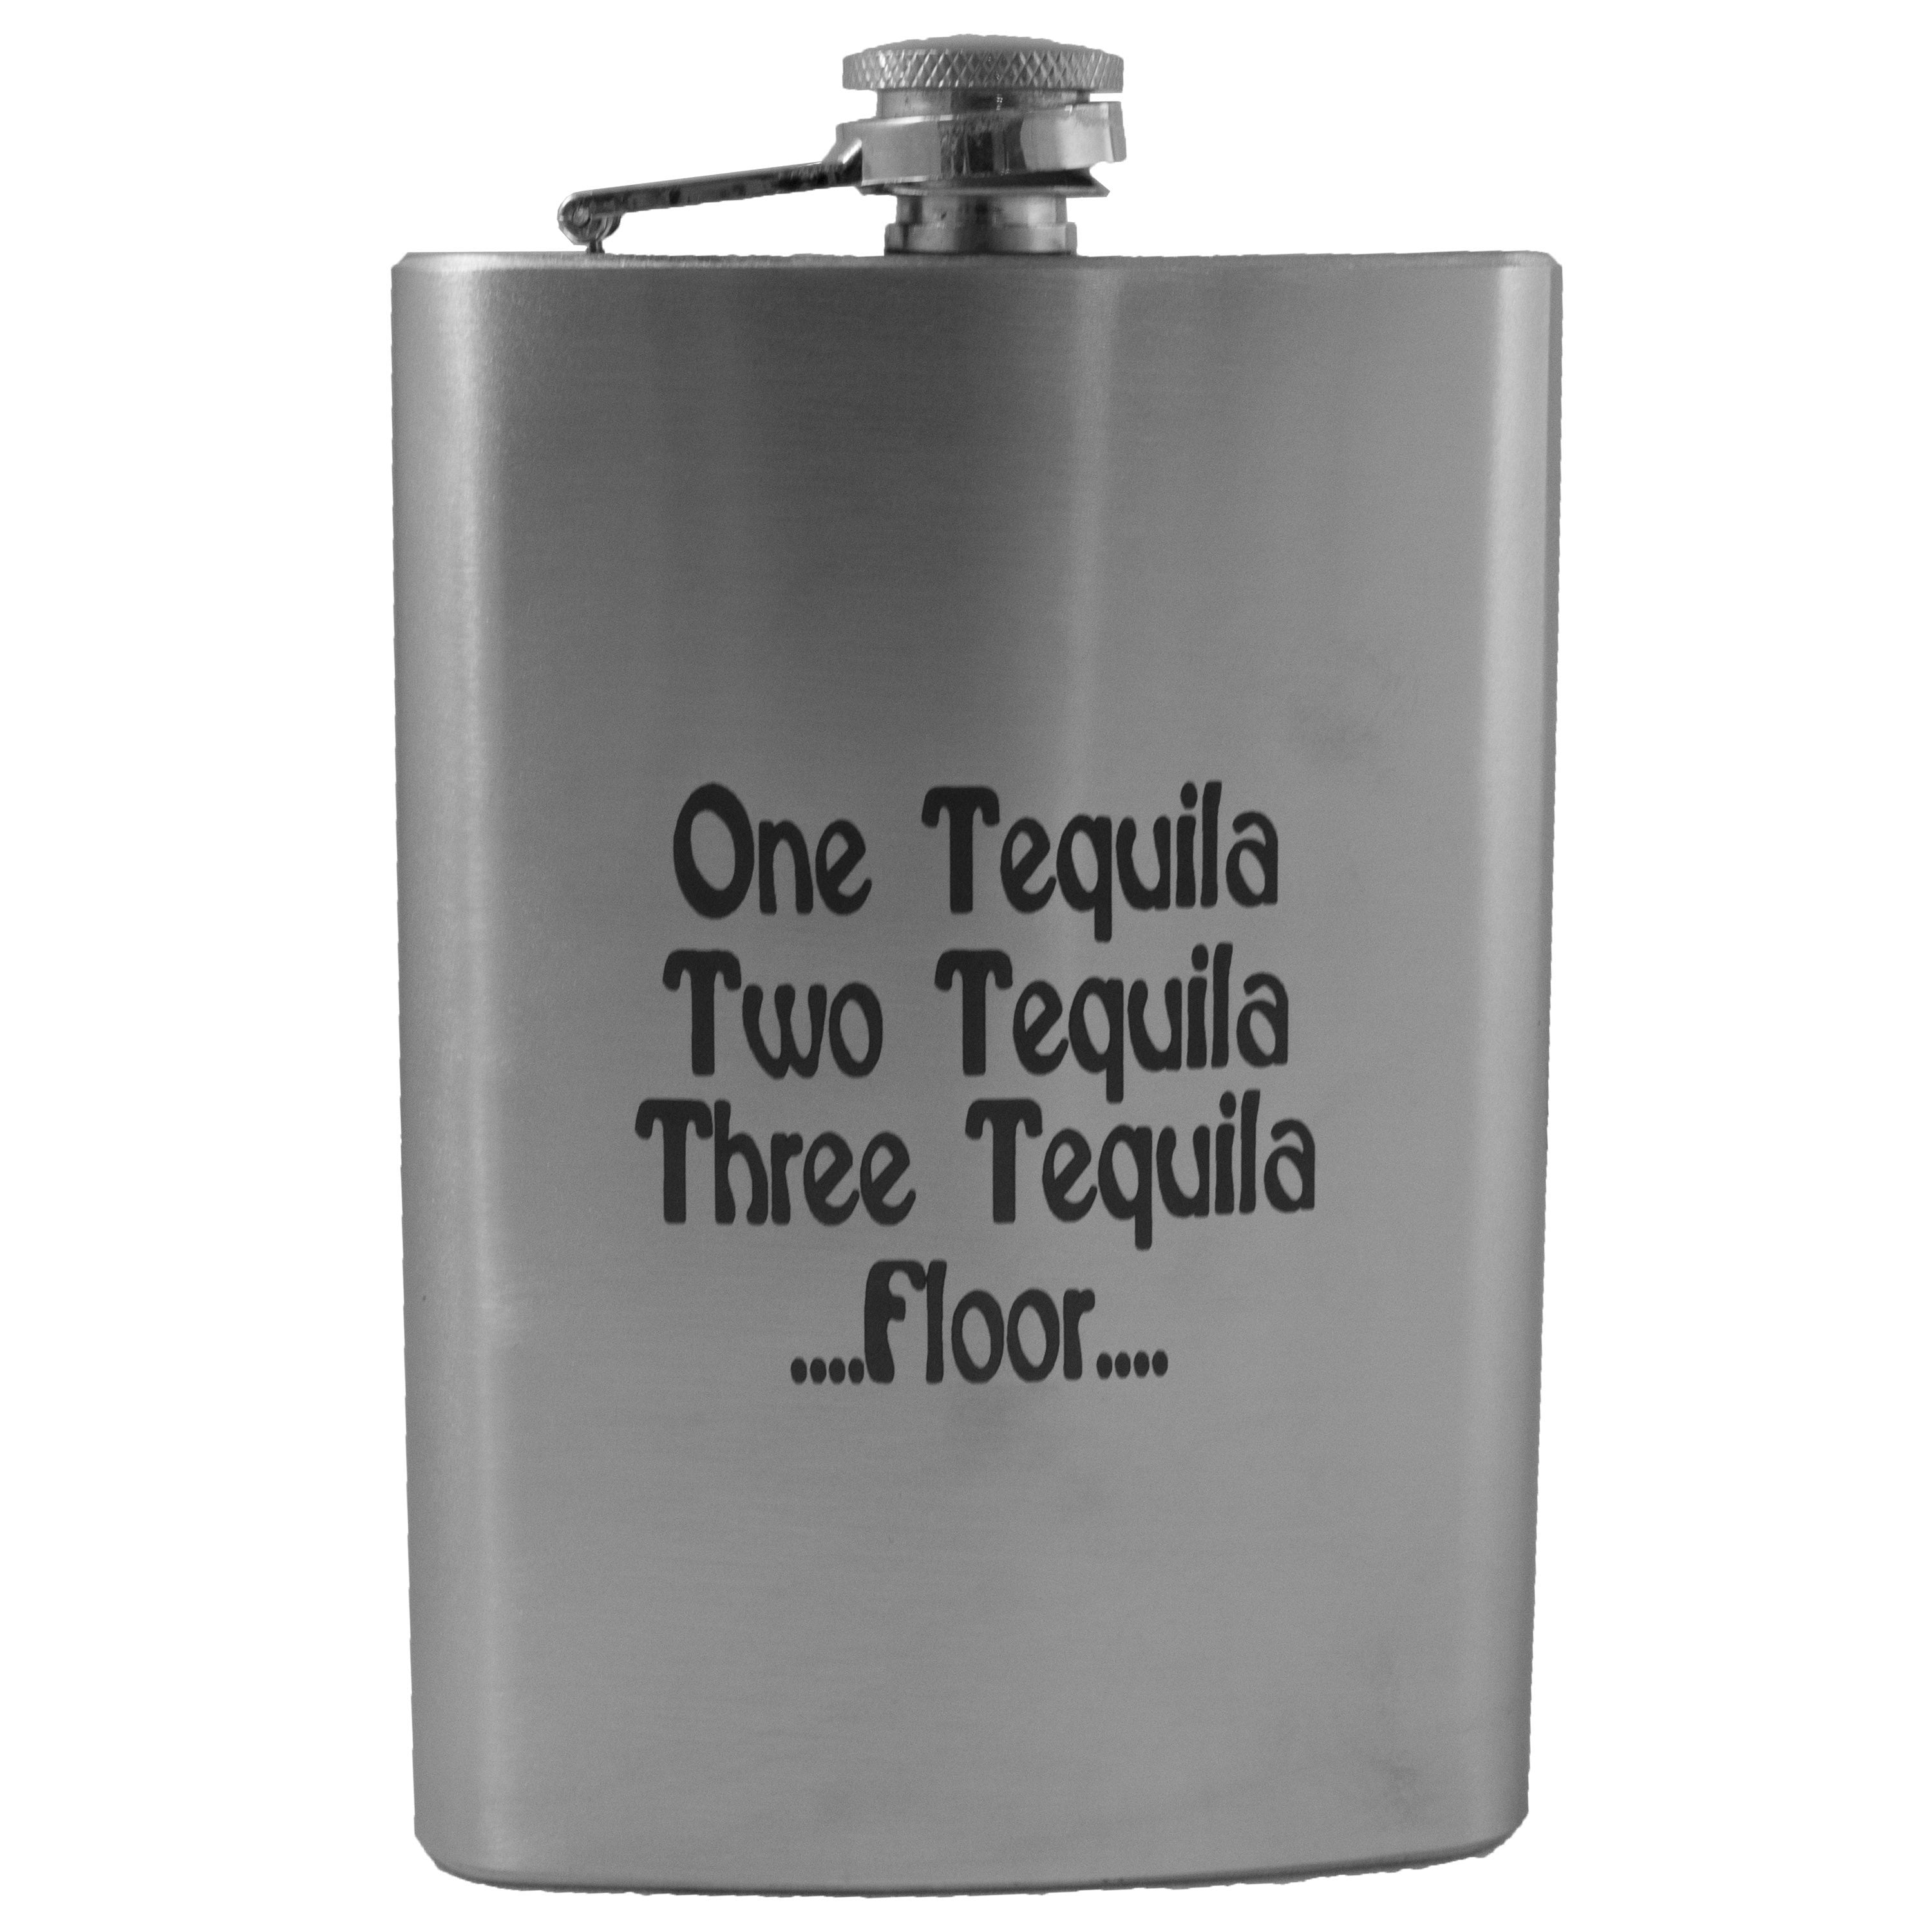 8oz One Tequila Two Tequila Three Tequila Floor Flask L1